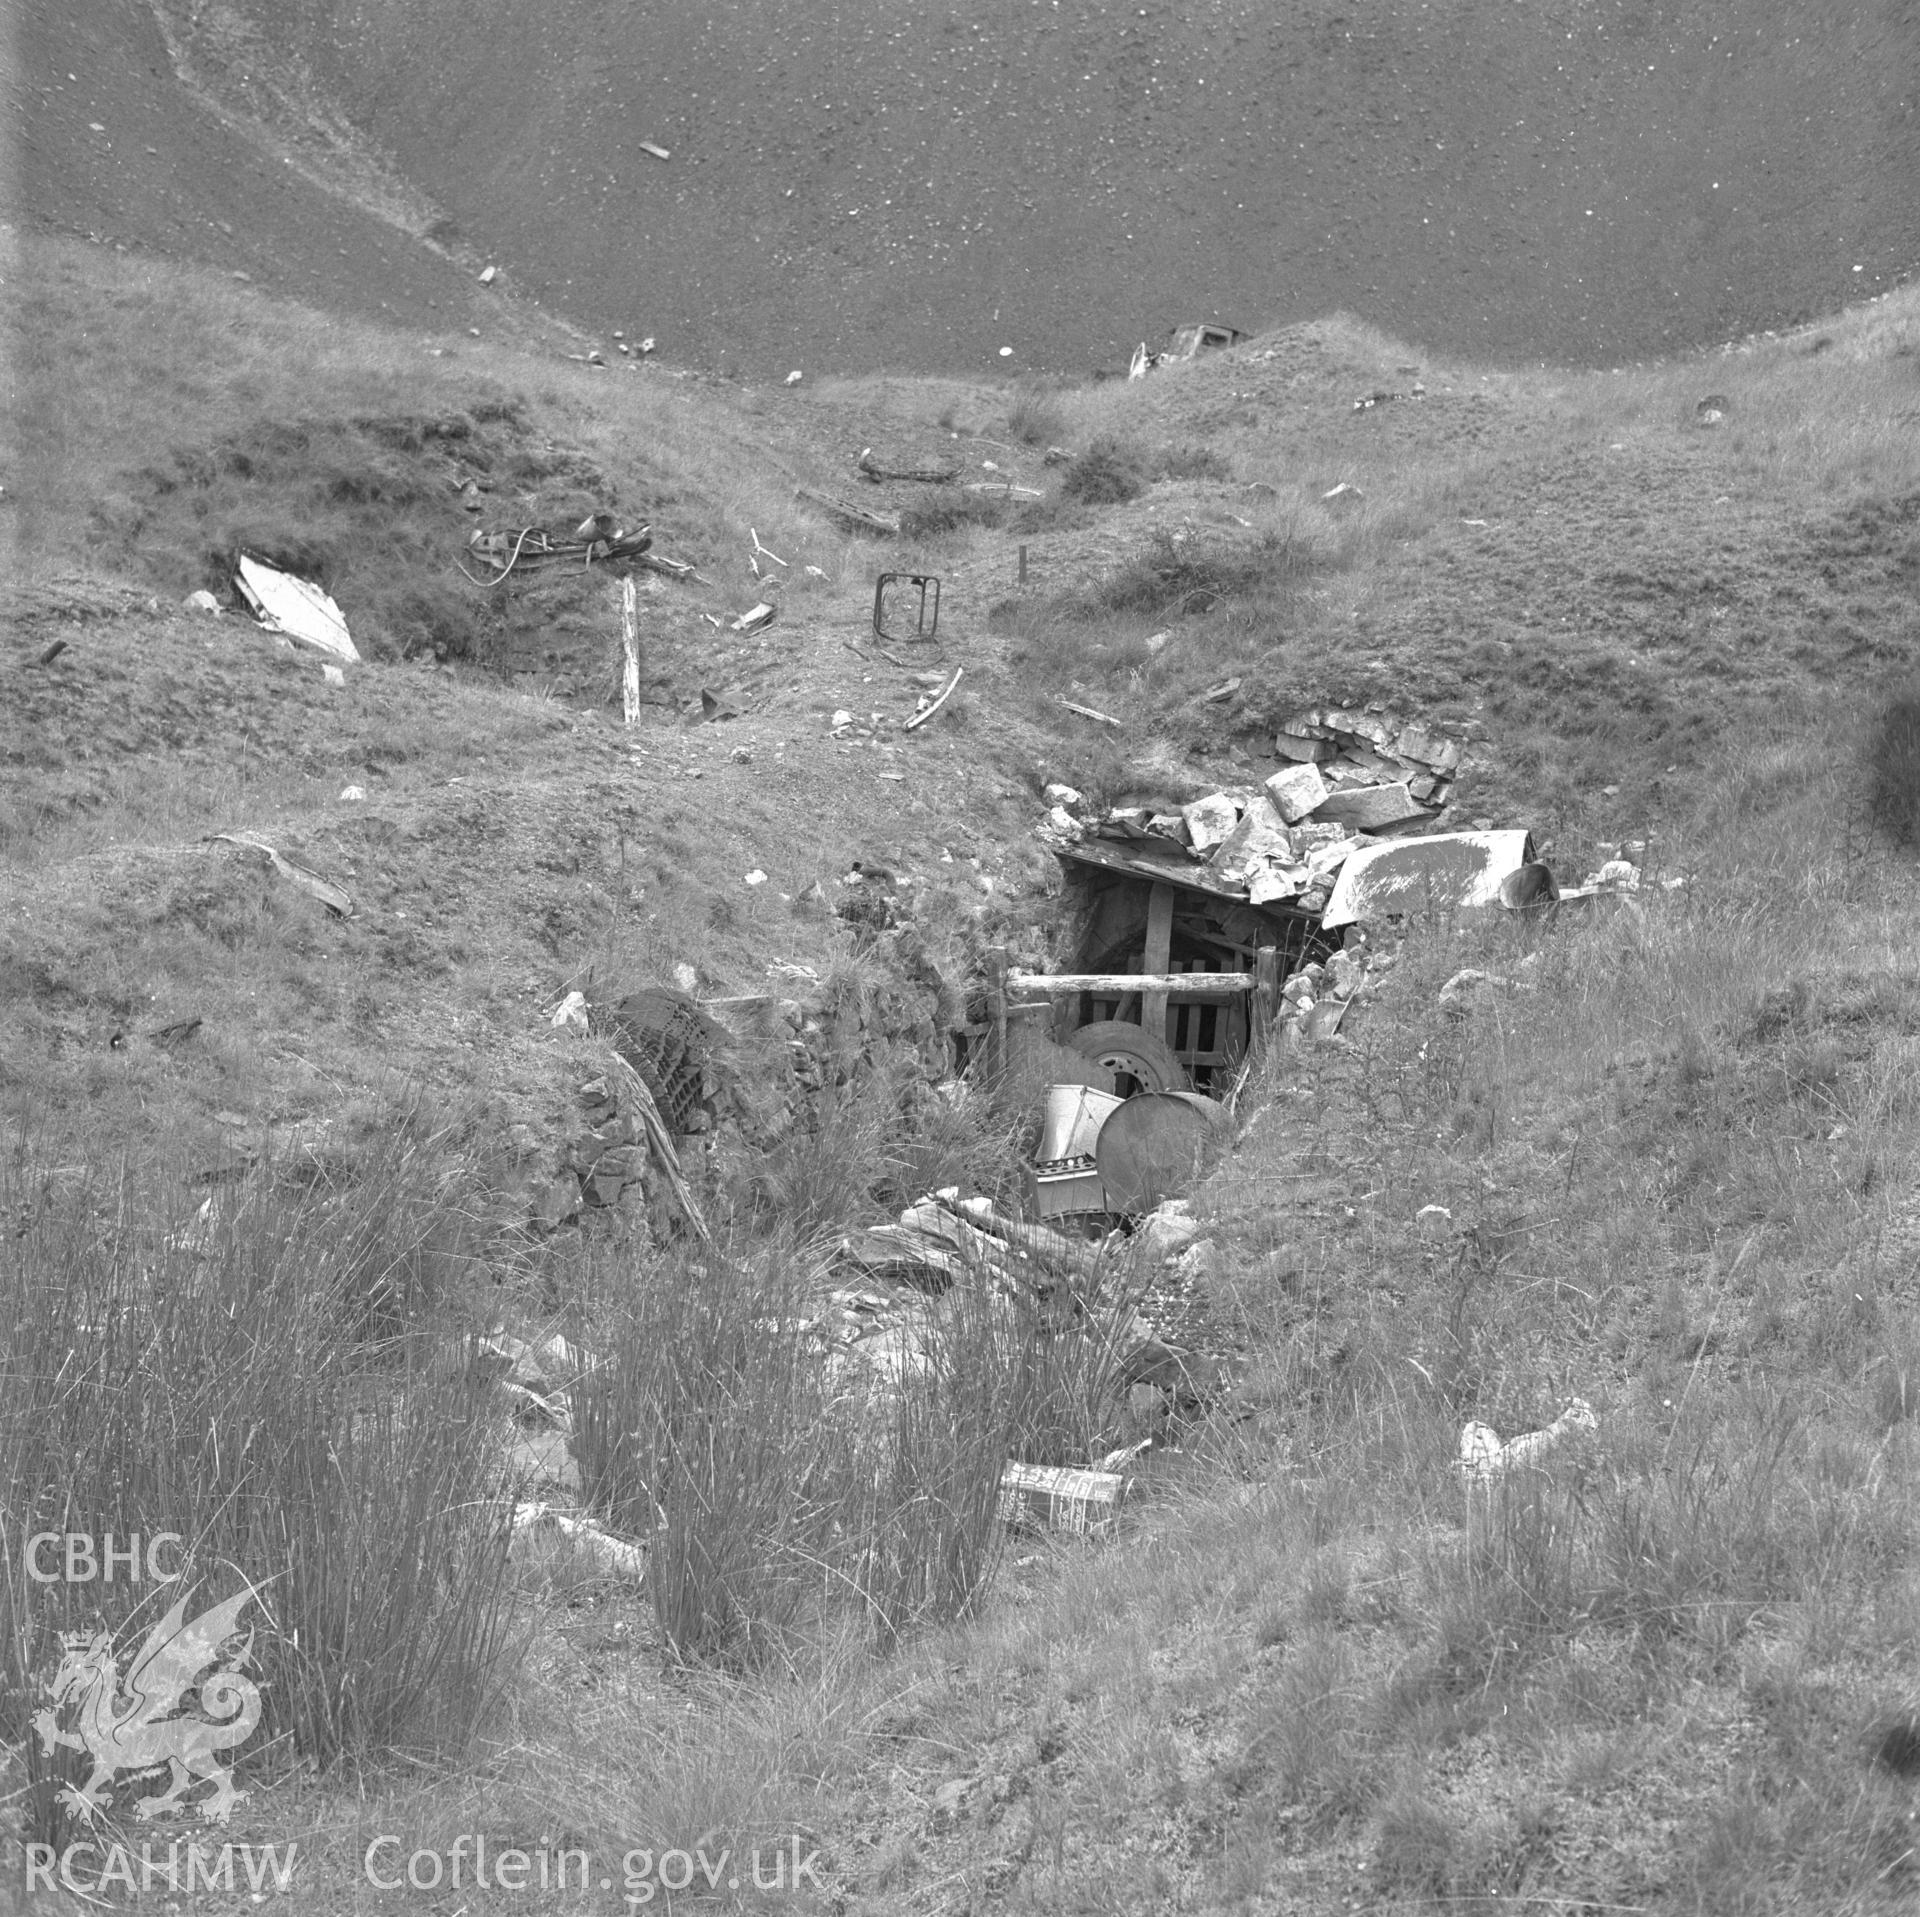 Digital copy of an acetate negative showing Dick Kear's slope at Big Pit, from the John Cornwell Collection.